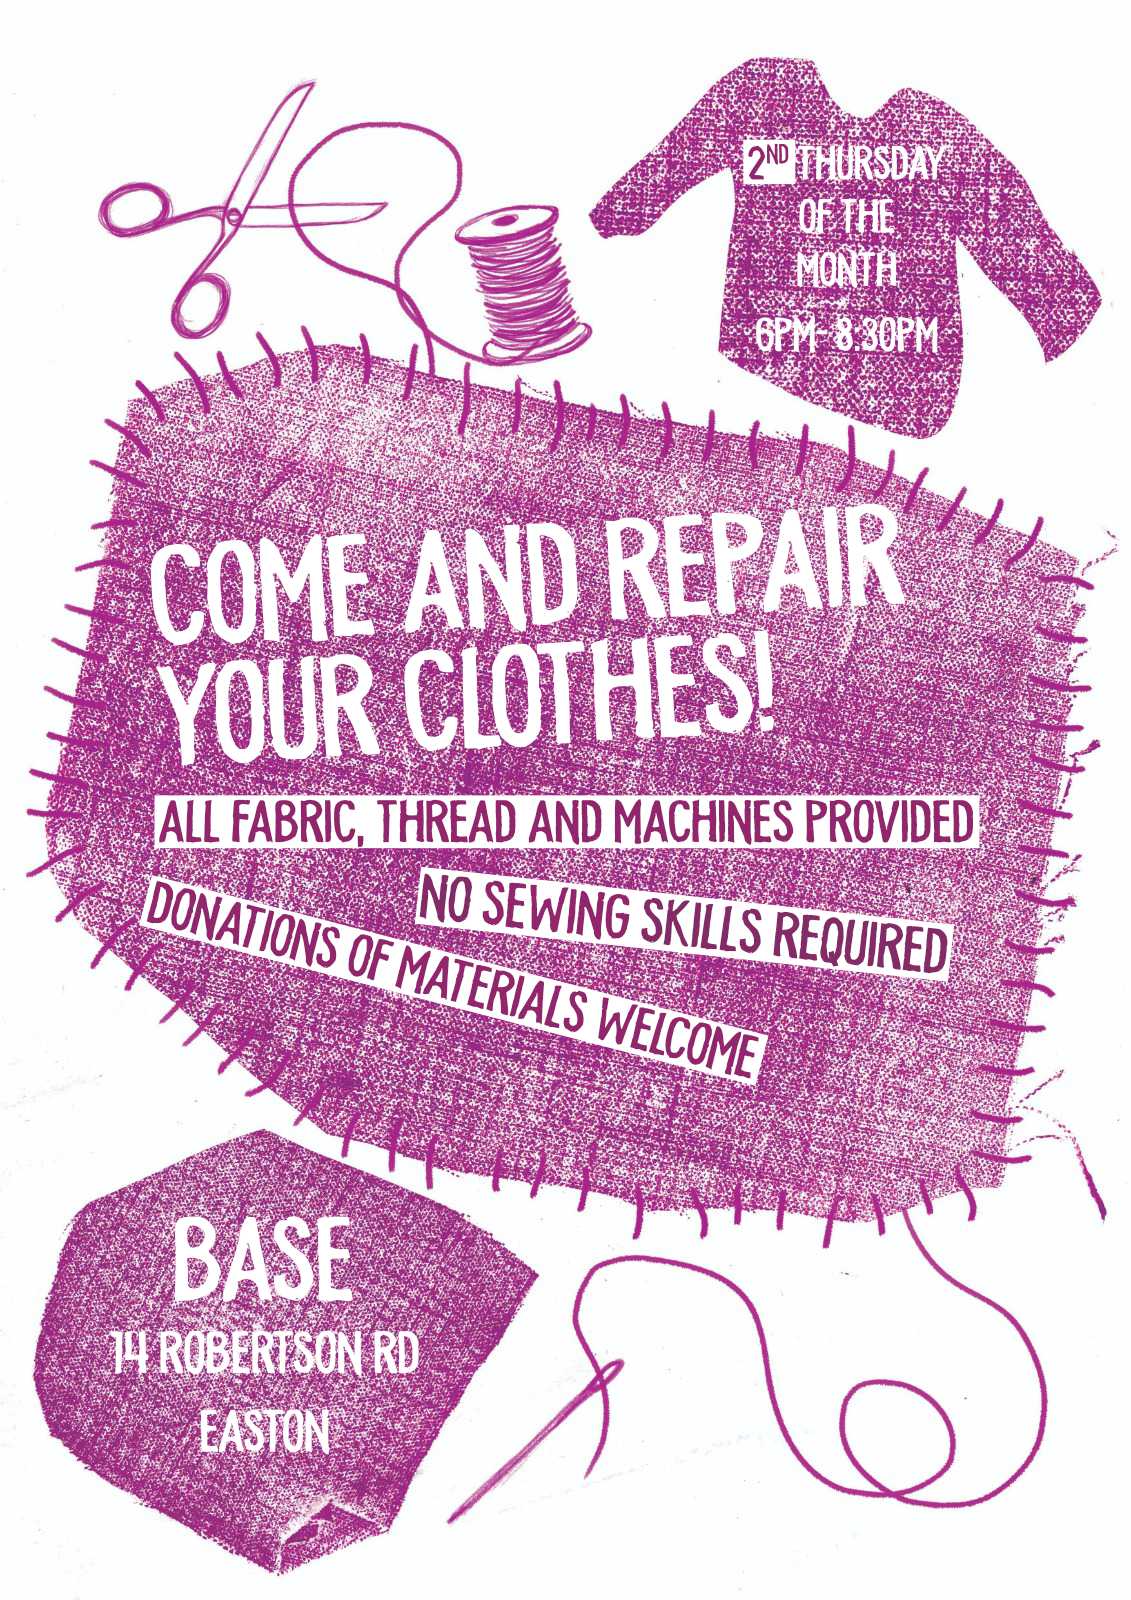 CLOTHES REPAIR CAFE: EVERY 2ND THURS 6 - 8.30PM